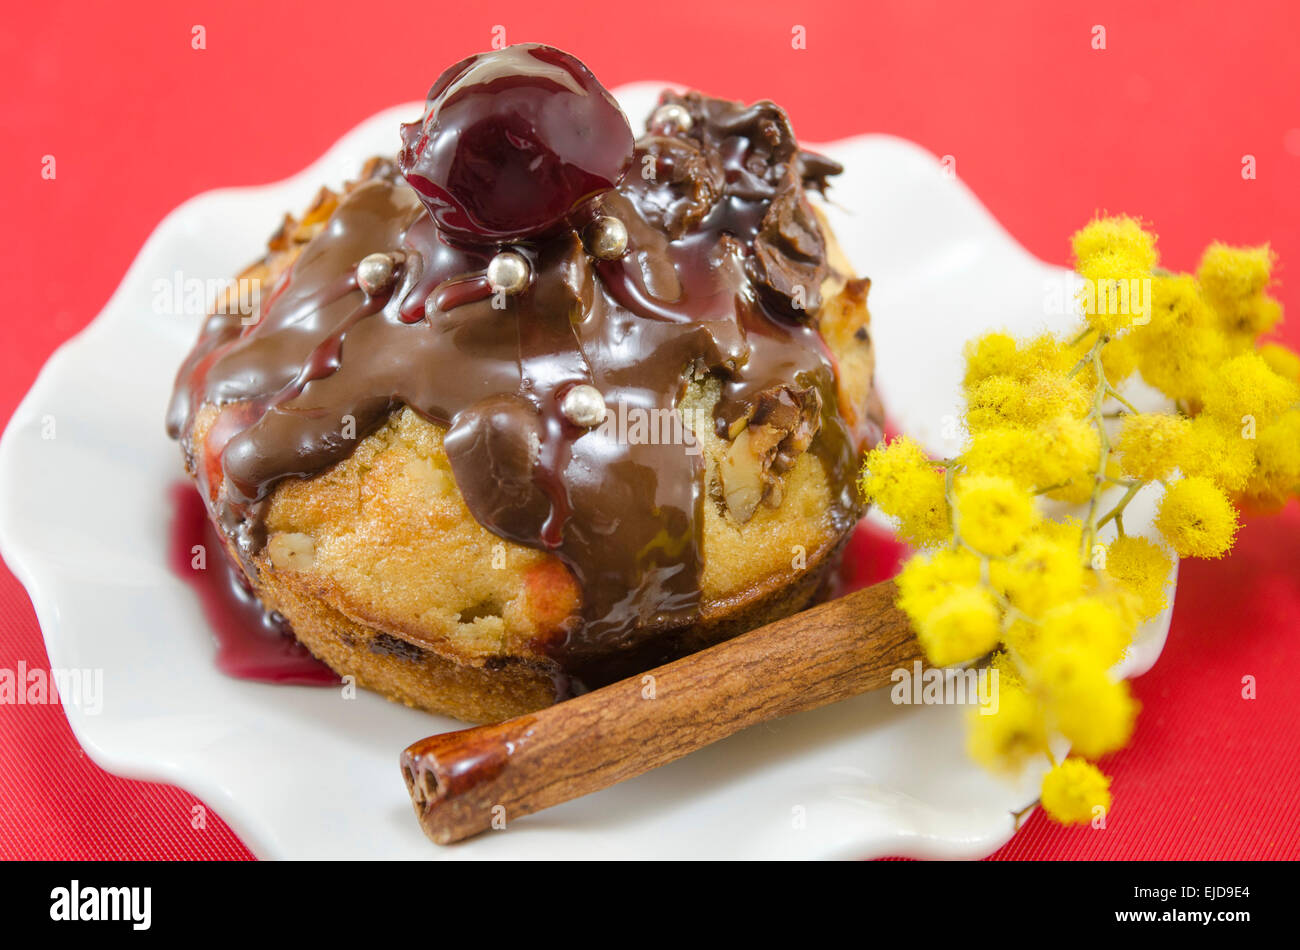 Chocolate muffin with a cherry on top put on a white plate decorated with a cinnamon stick and mimosa flowers Stock Photo